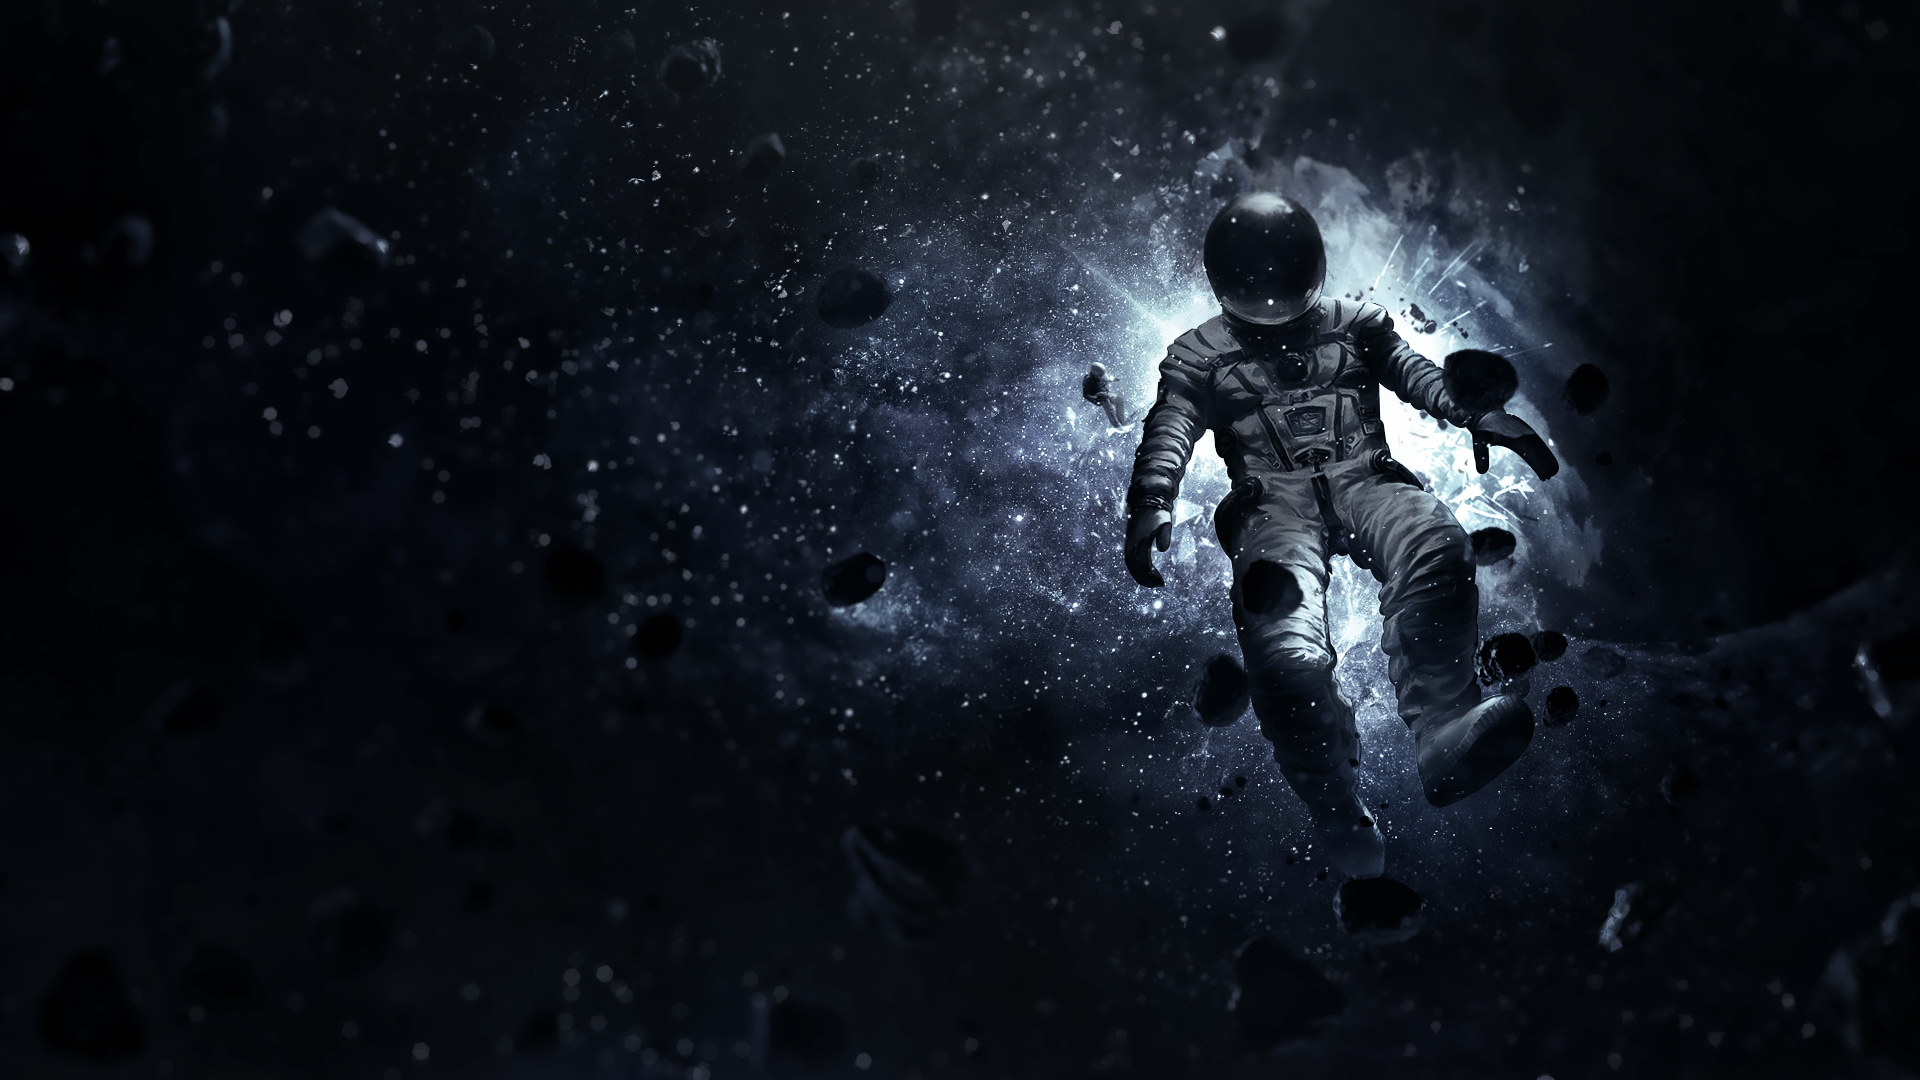 Space Astronaut lost in space 095120 png 1920x1080